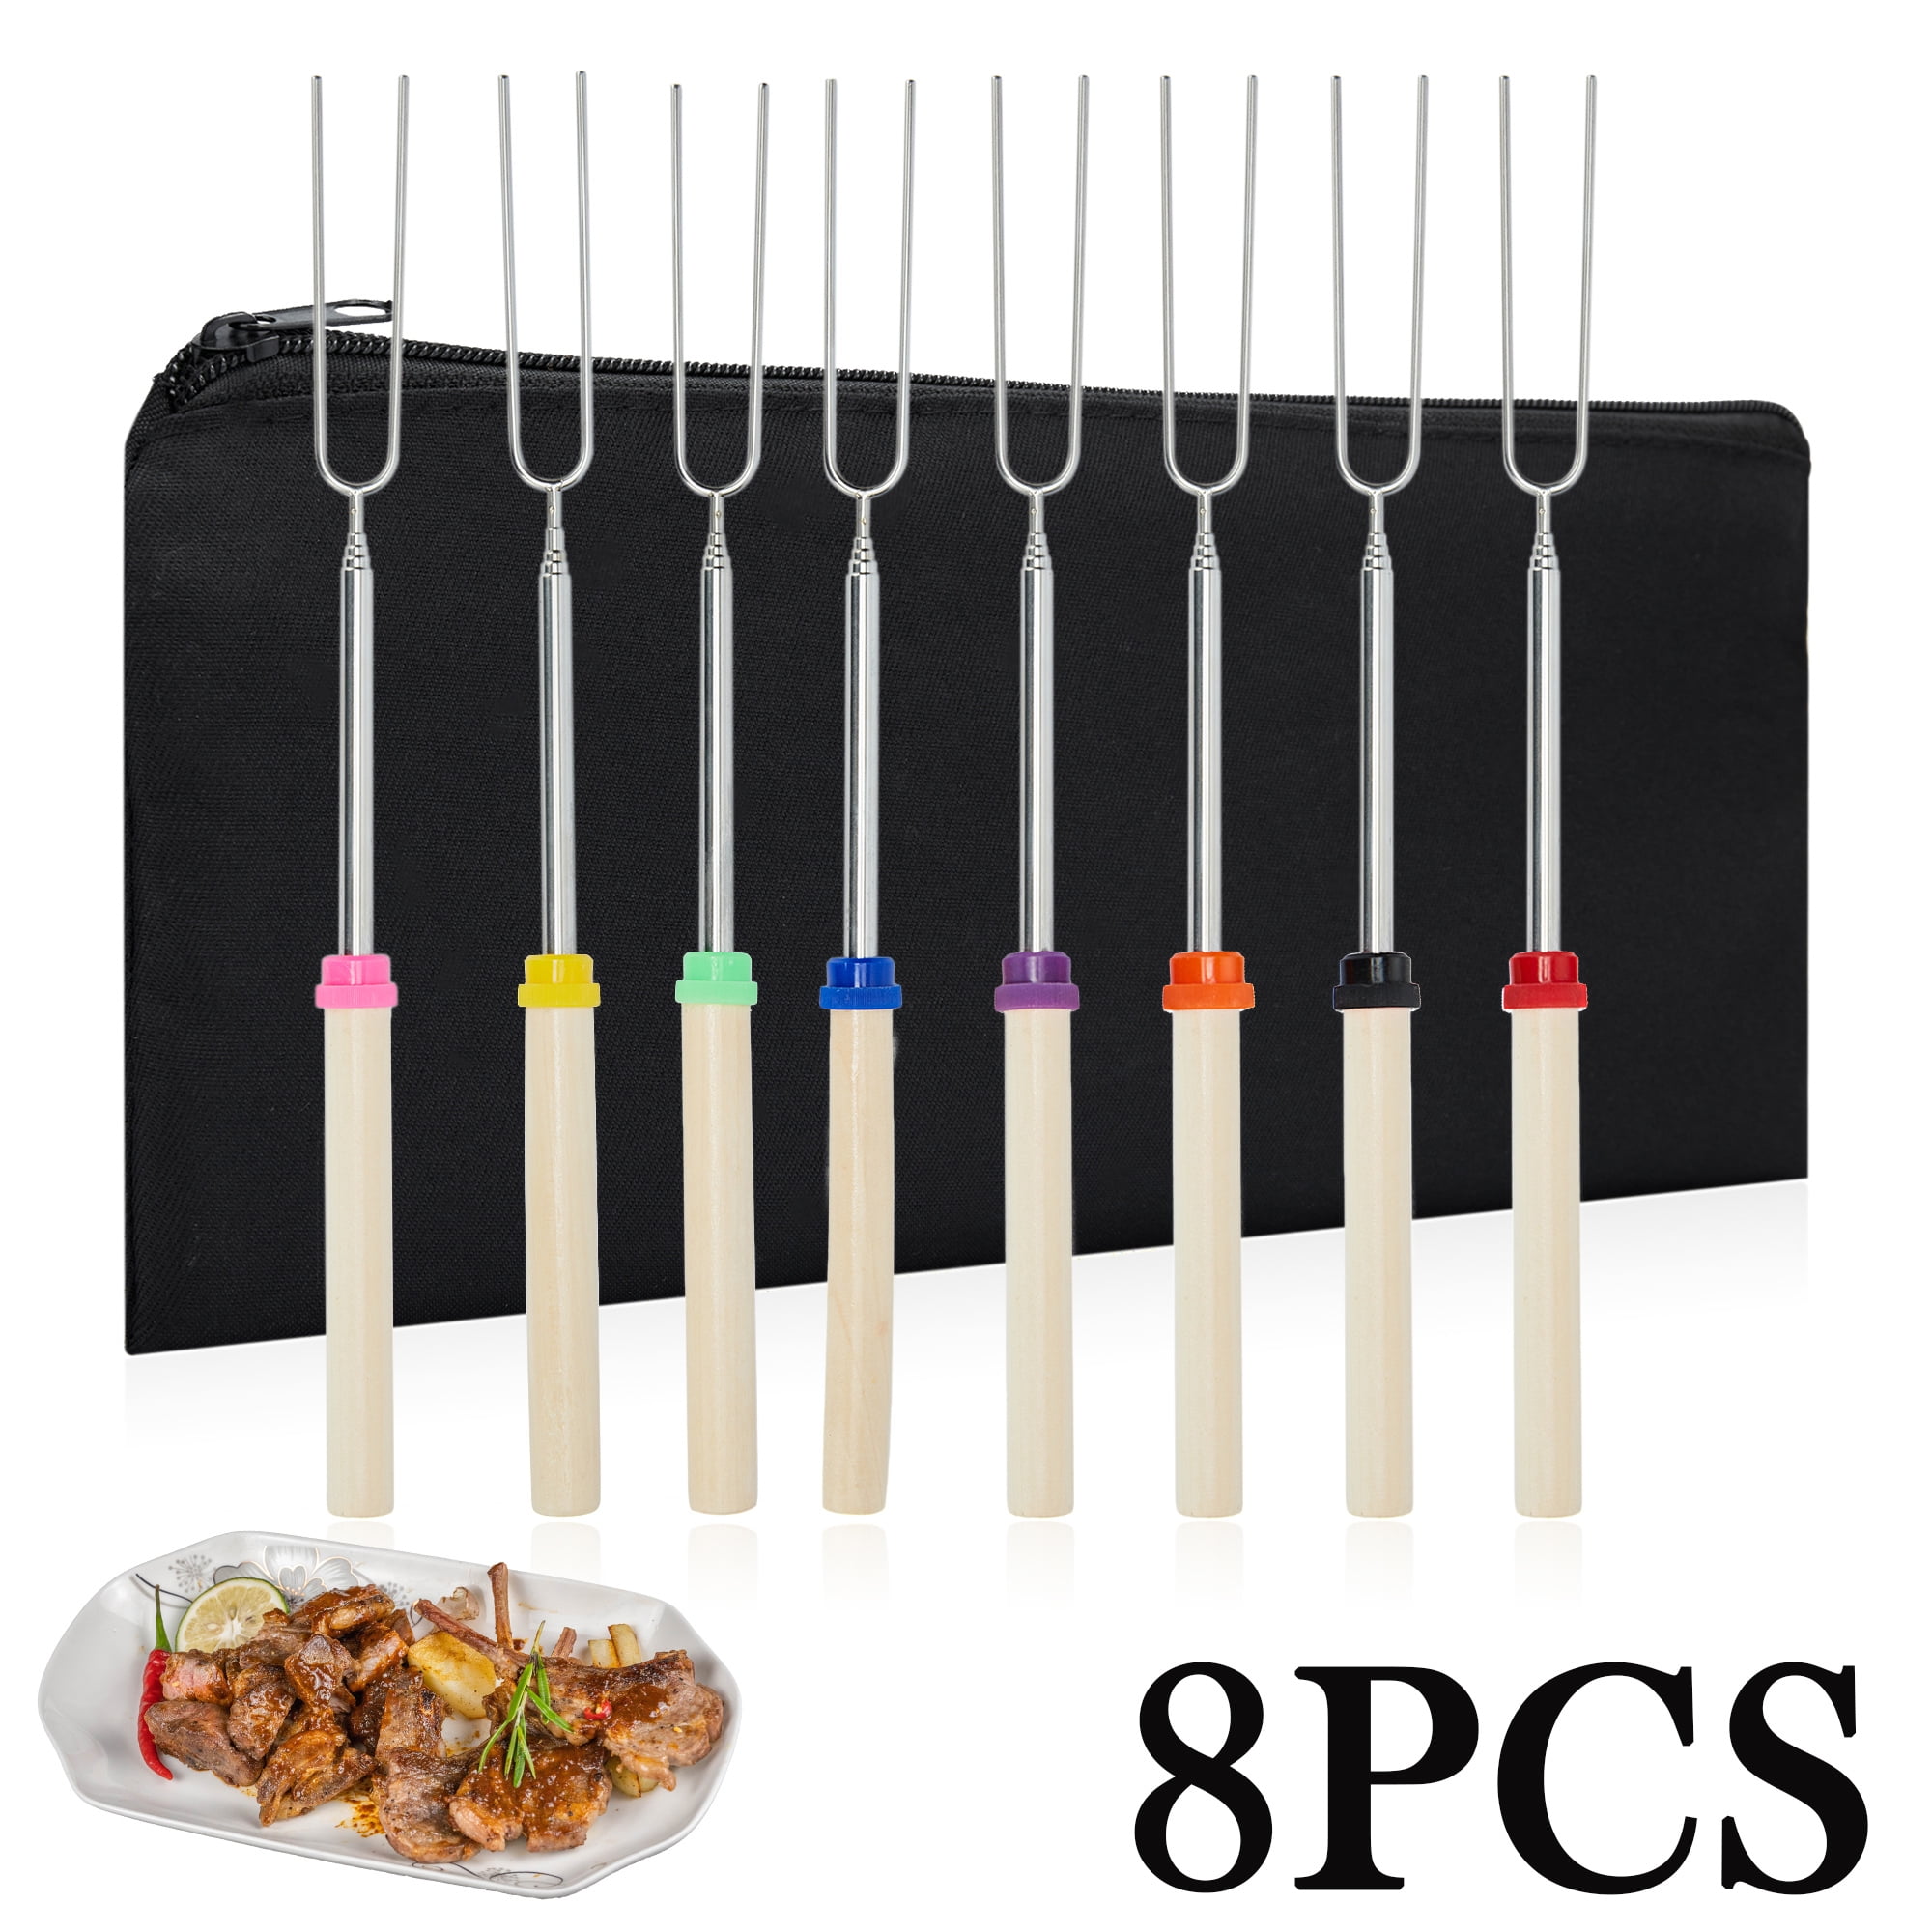 New! Marshmallow Roasting Sticks Room Essentials Grilling Extension Forks 